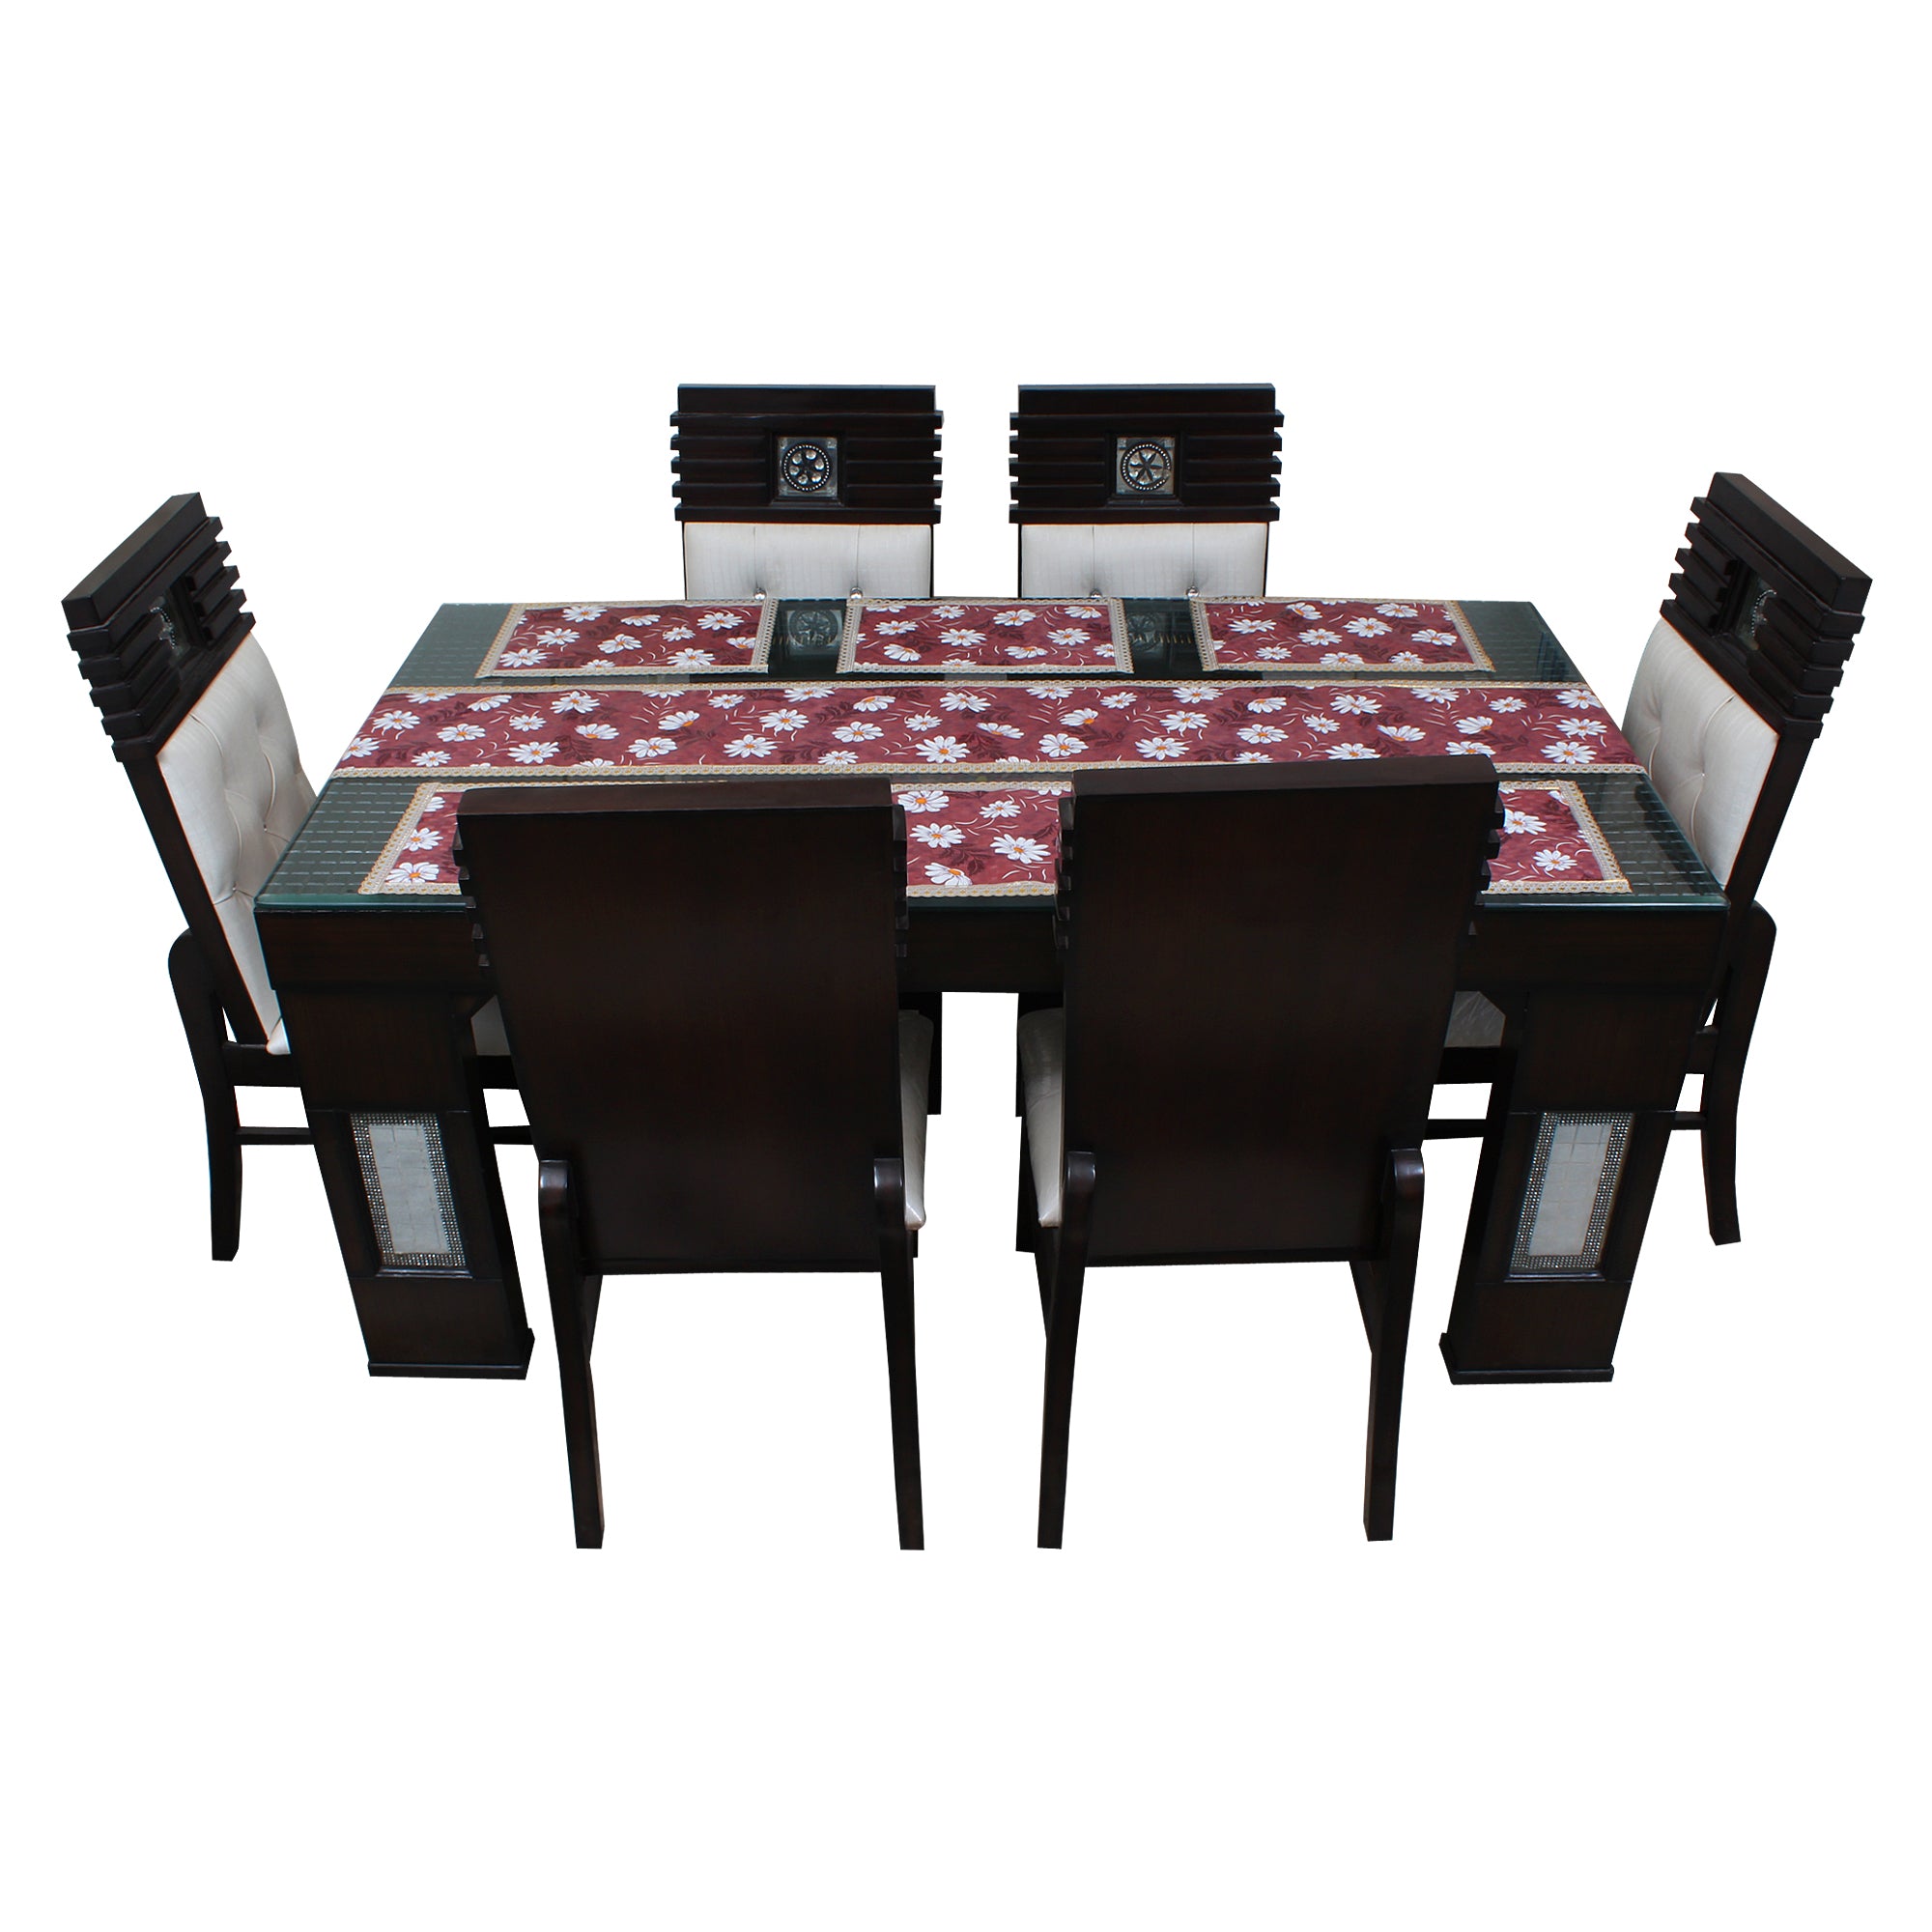 Waterproof & Dustproof Dining Table Runner With 6 Placemats, SA08 - Dream Care Furnishings Private Limited